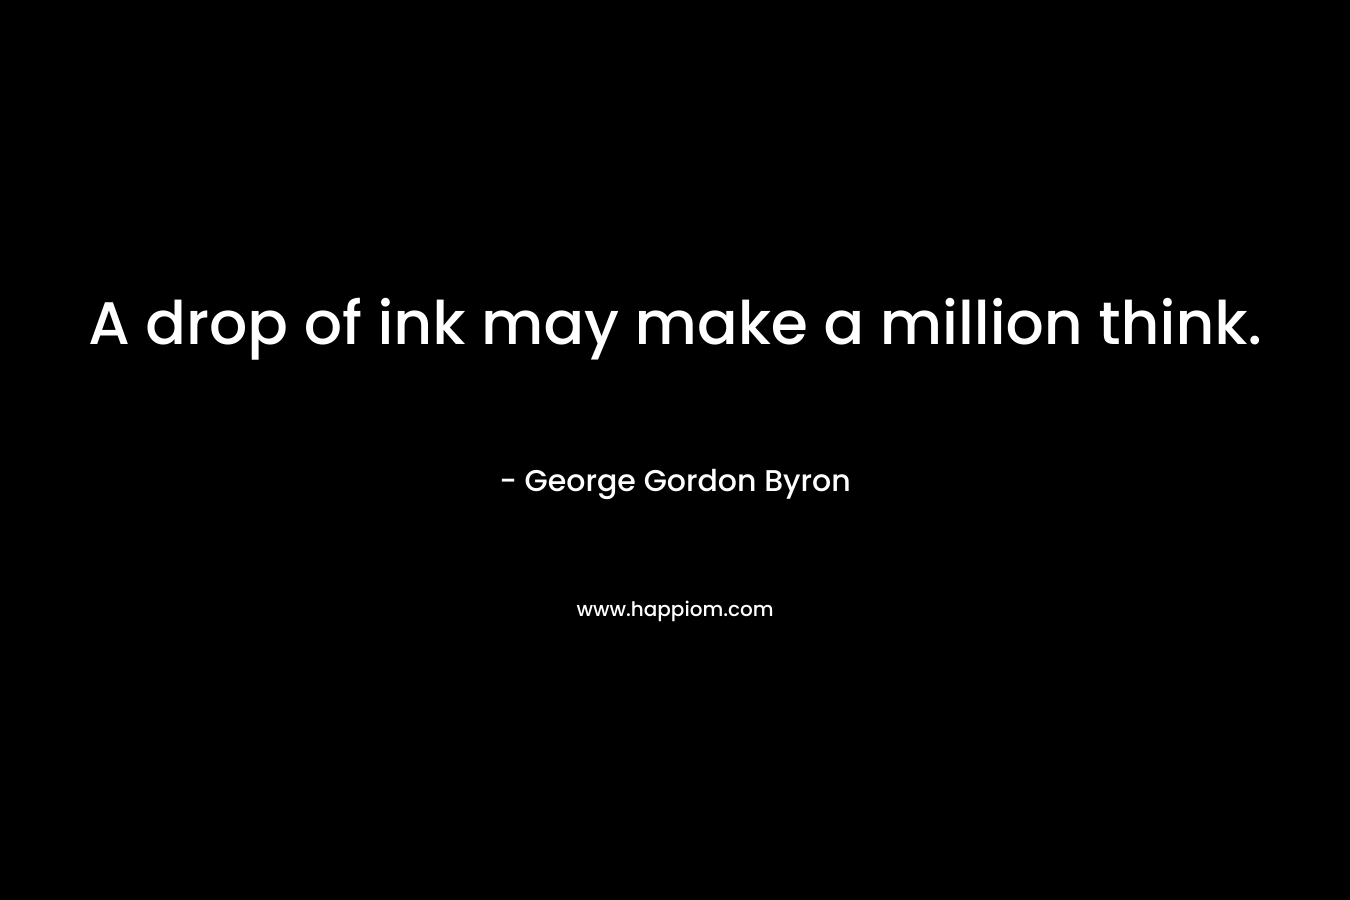 A drop of ink may make a million think.